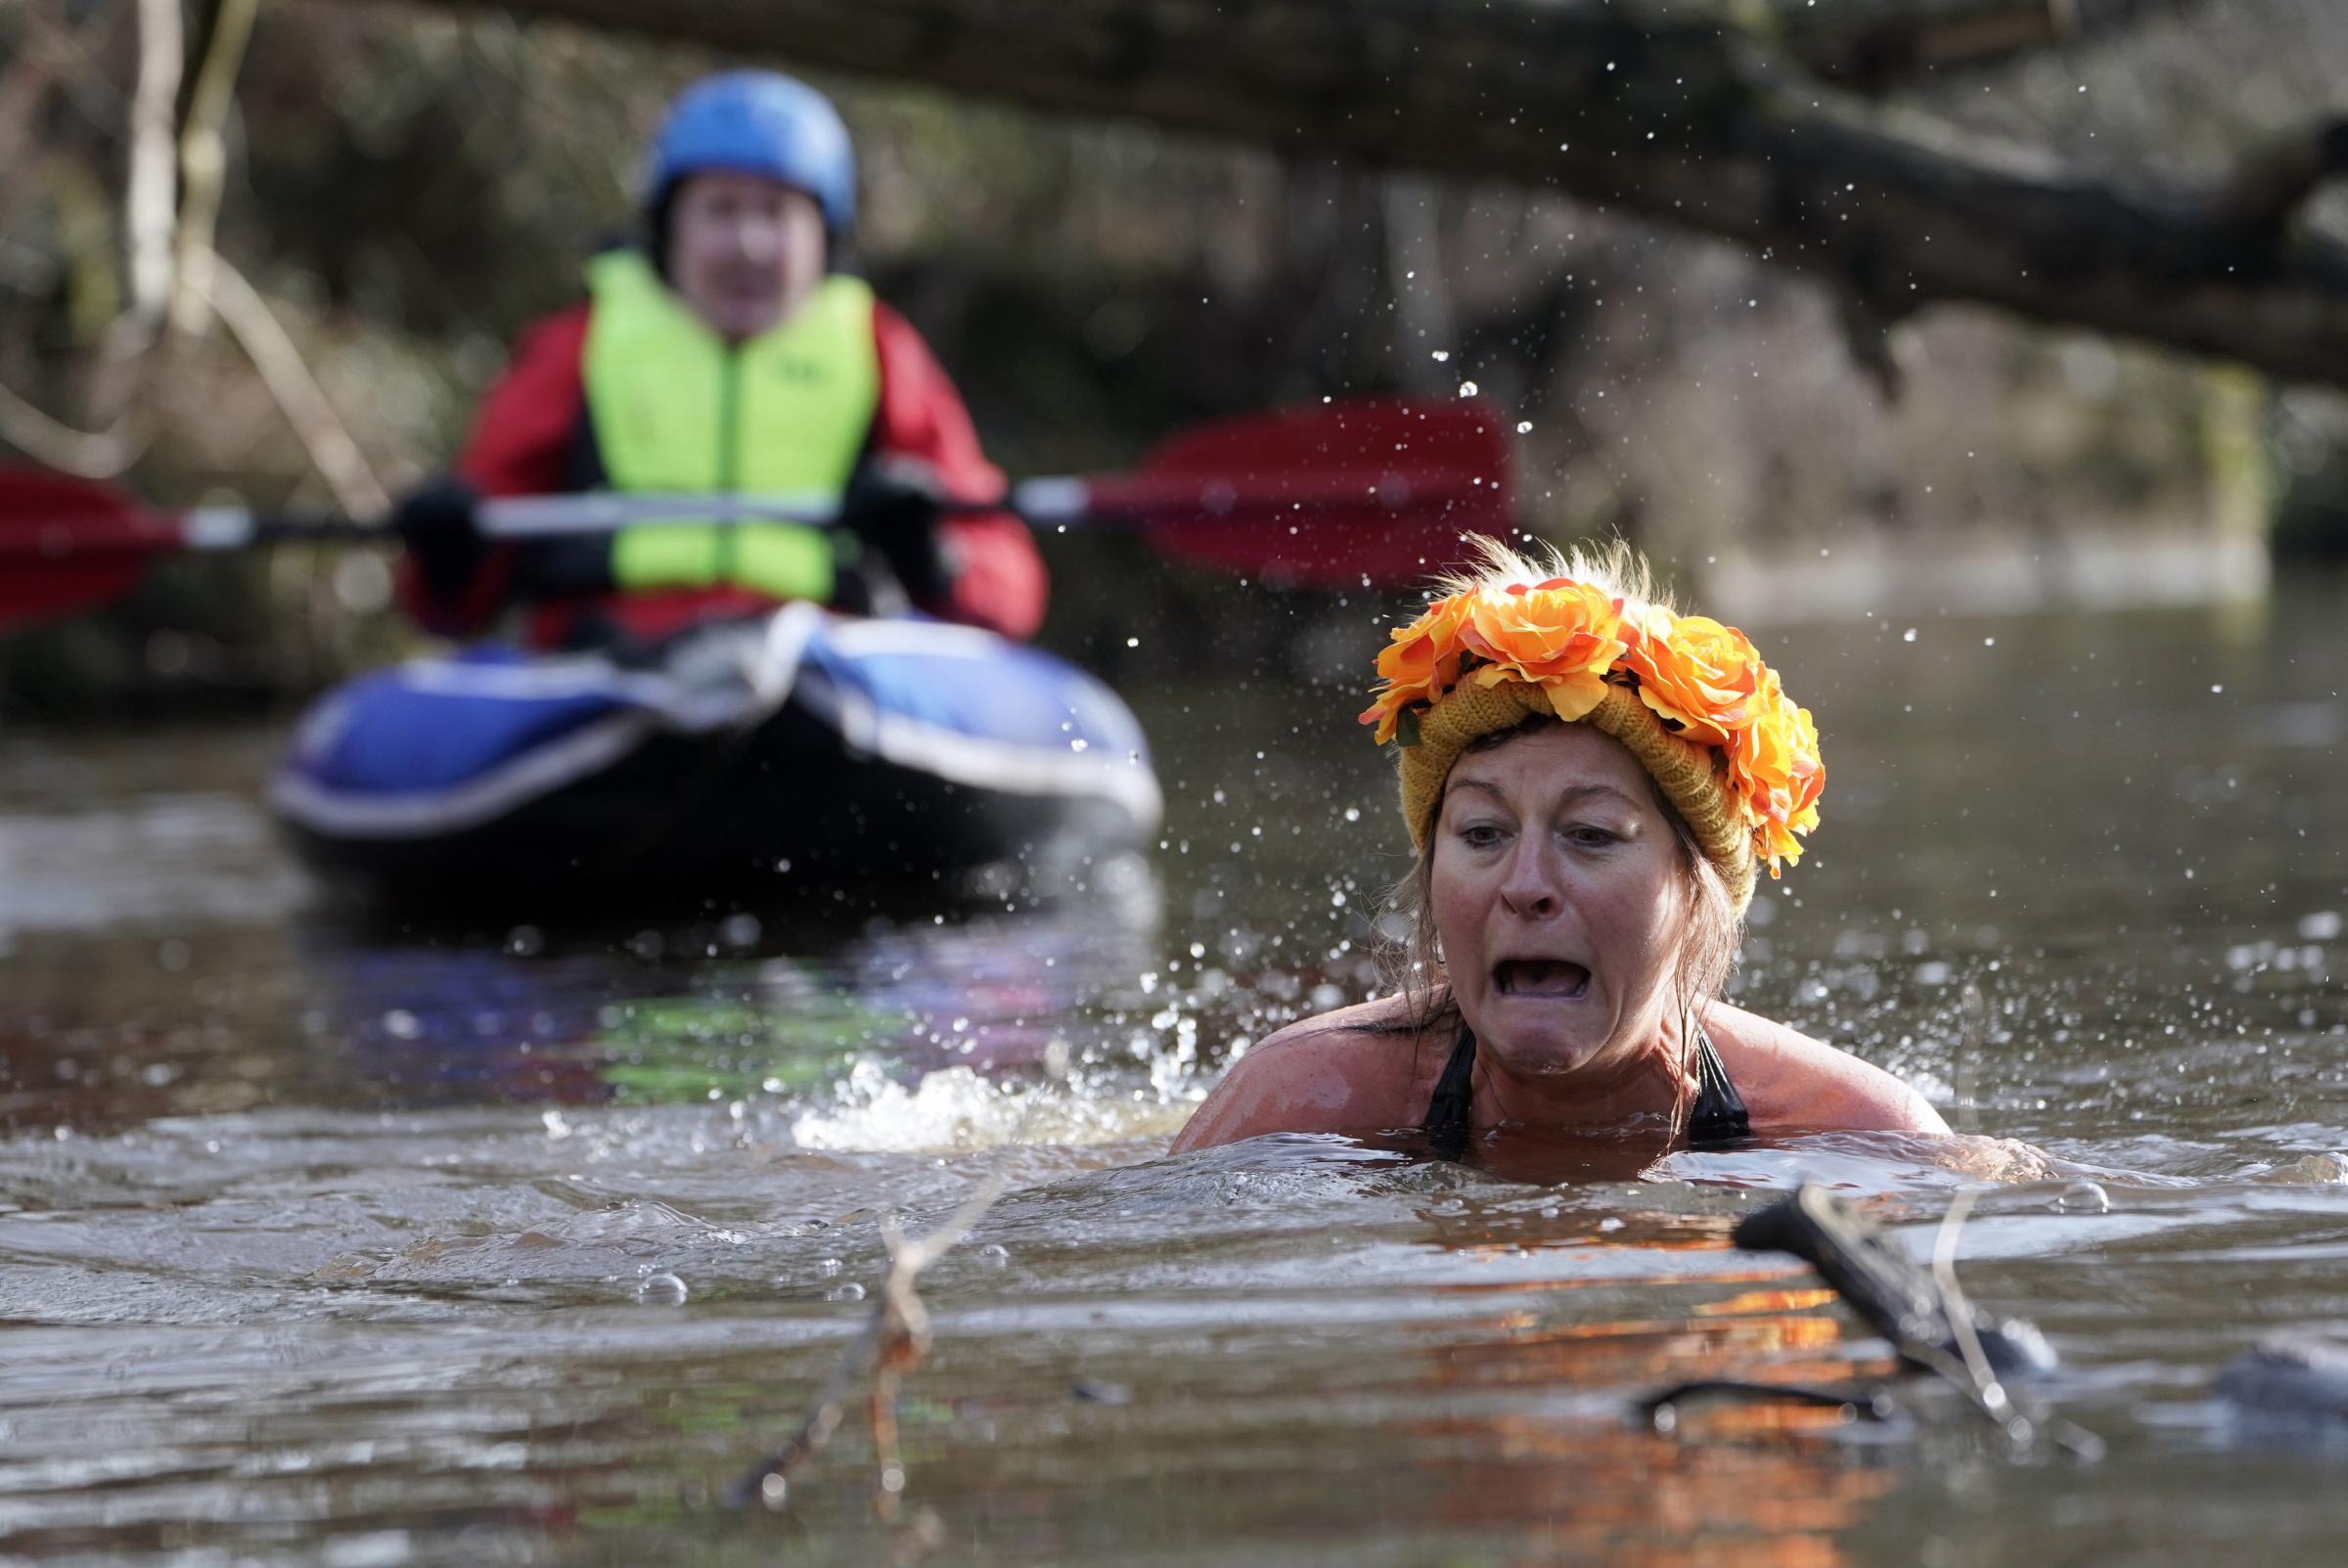 Lara Fawcett swims in the River Nidd in Knaresborough, North Yorkshire, to raise money for the Archbishop of York Youth Trust Photo: Owen Humphreys/PA Wire.